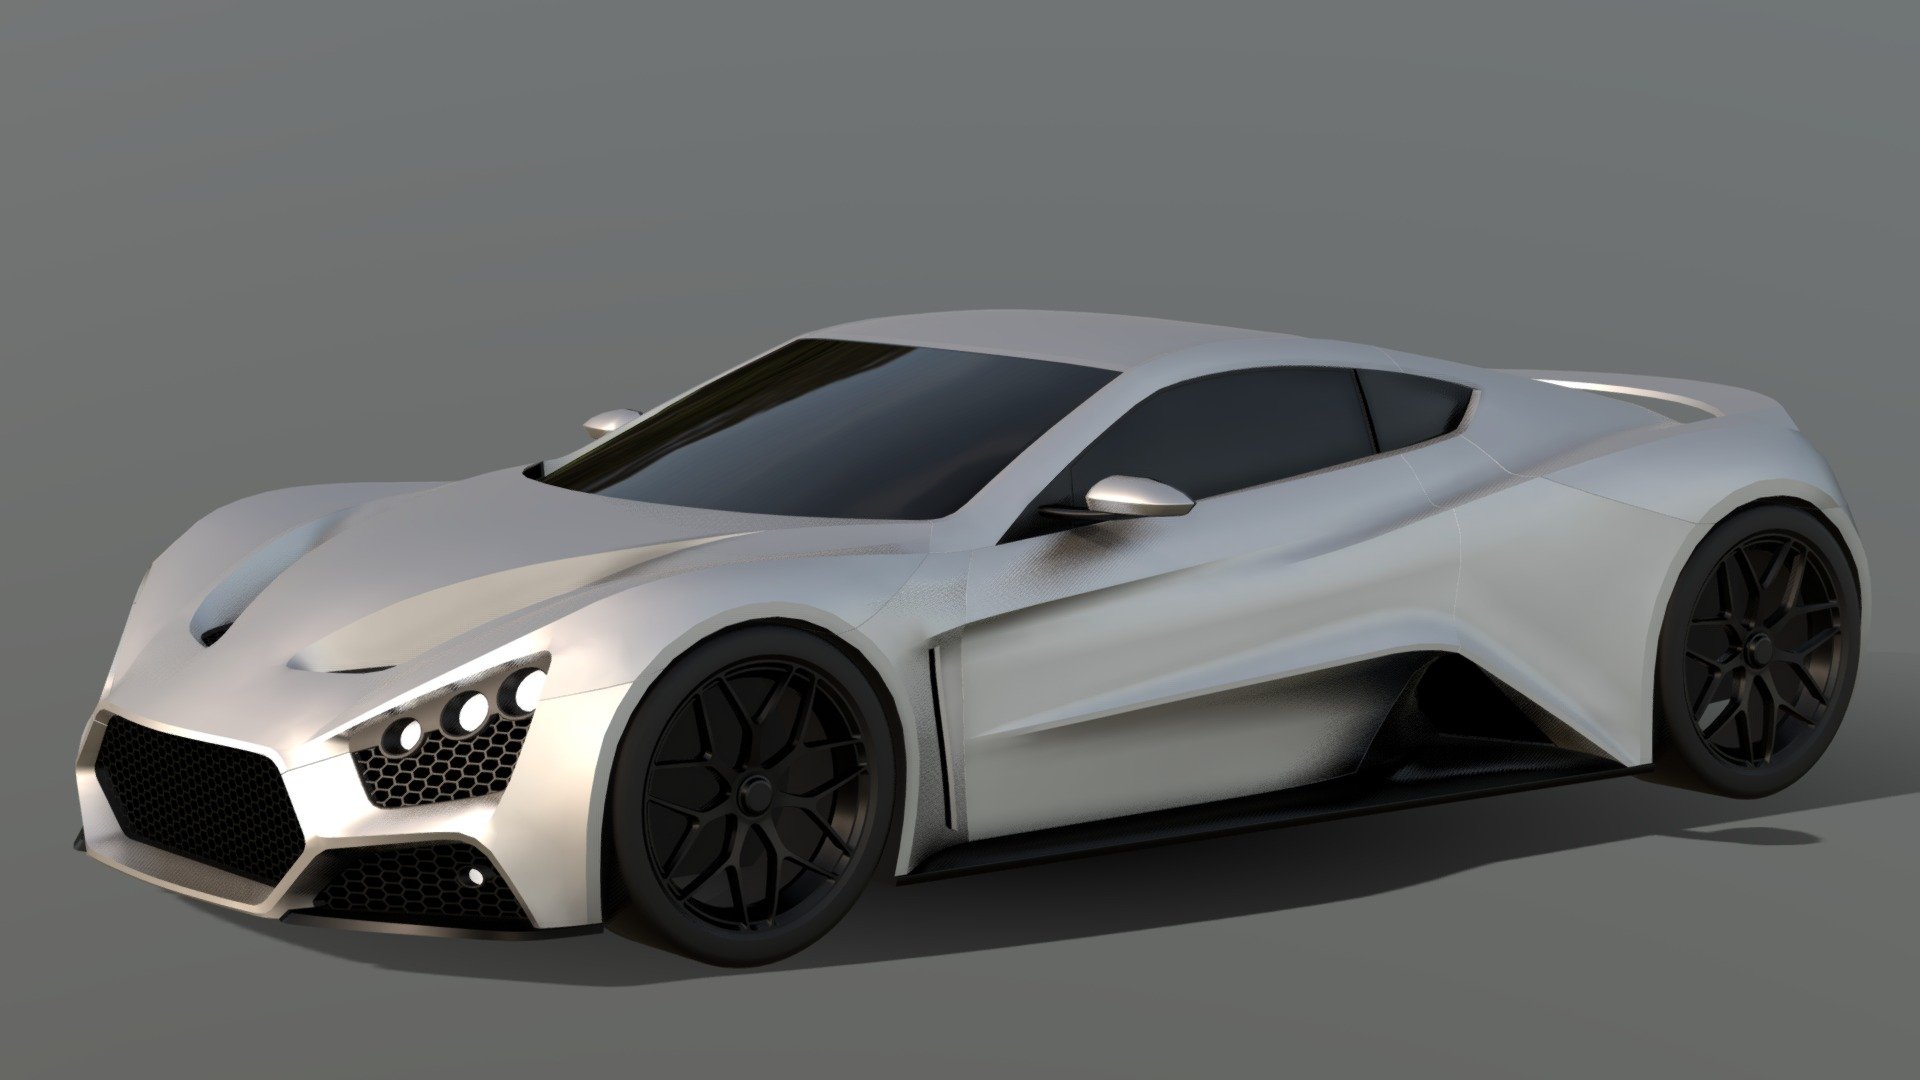 one of my favourite modern supercars
so very cool and awesome

https://en.wikipedia.org/wiki/Zenvo_ST1 - 2009 Zenvo ST1 - Buy Royalty Free 3D model by veratech 3d model